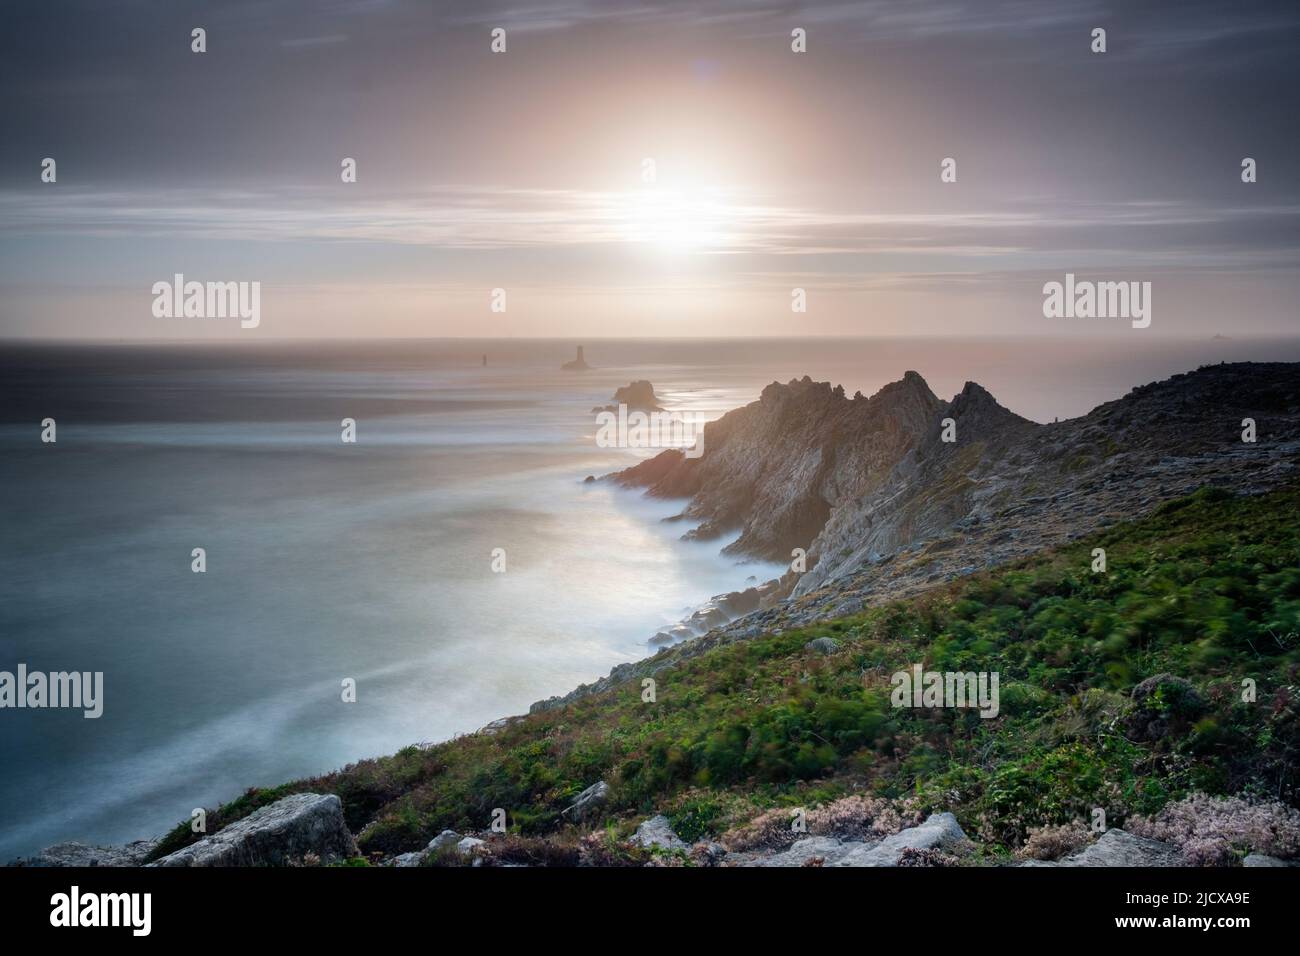 Sunset long exposure at Pointe du Raz promontory, Finistere, Brittany, France, Europe Stock Photo